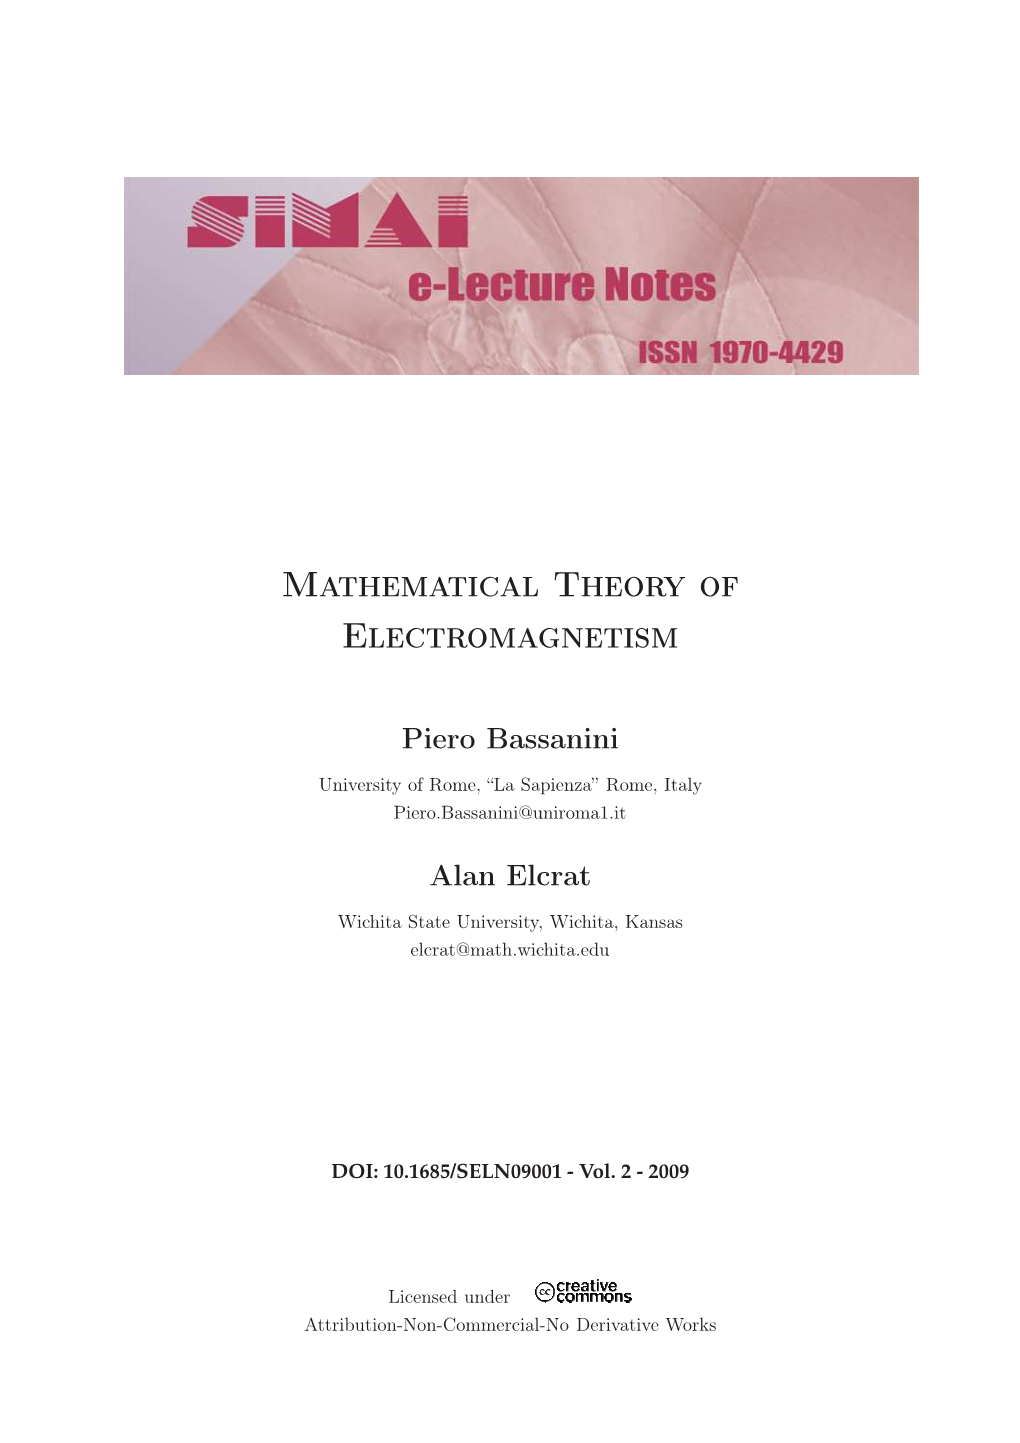 Mathematical Theory of Electromagnetism